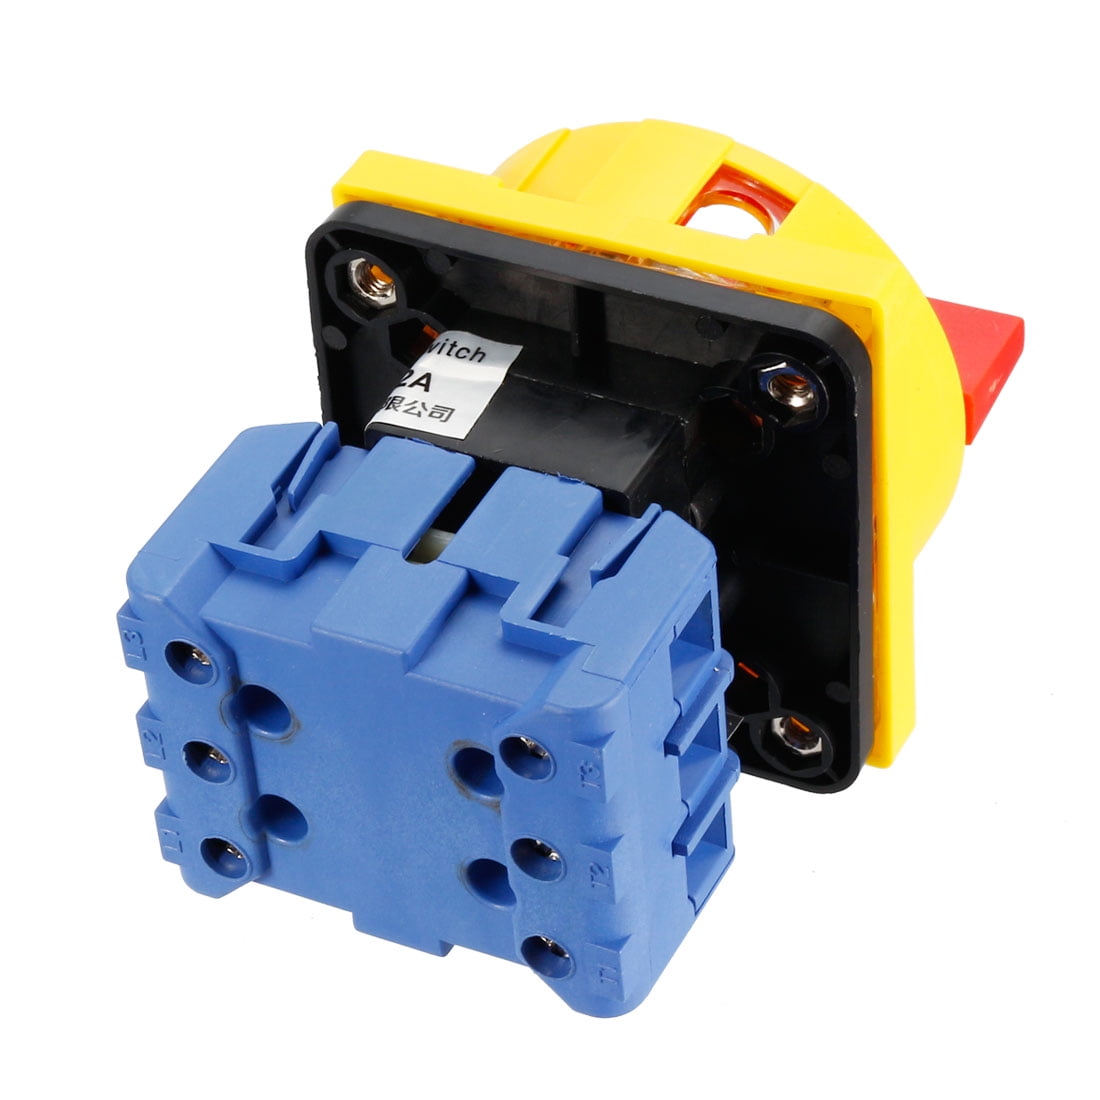 SZD11-32 On/Off Rotary Cam Load Circuit Breaker Switch 